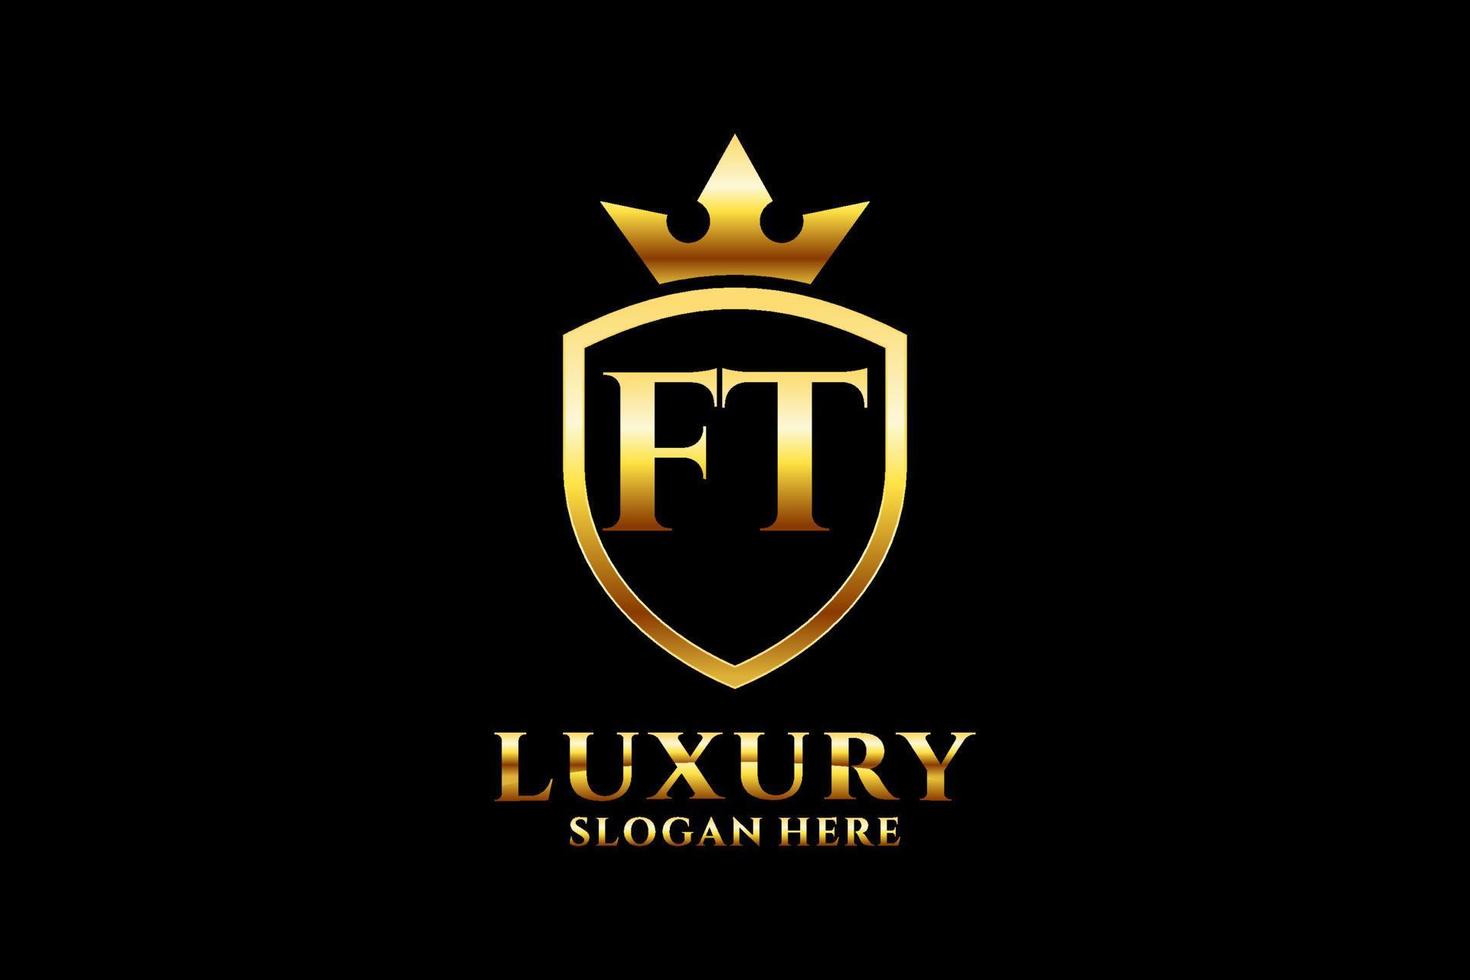 initial FT elegant luxury monogram logo or badge template with scrolls and royal crown - perfect for luxurious branding projects vector